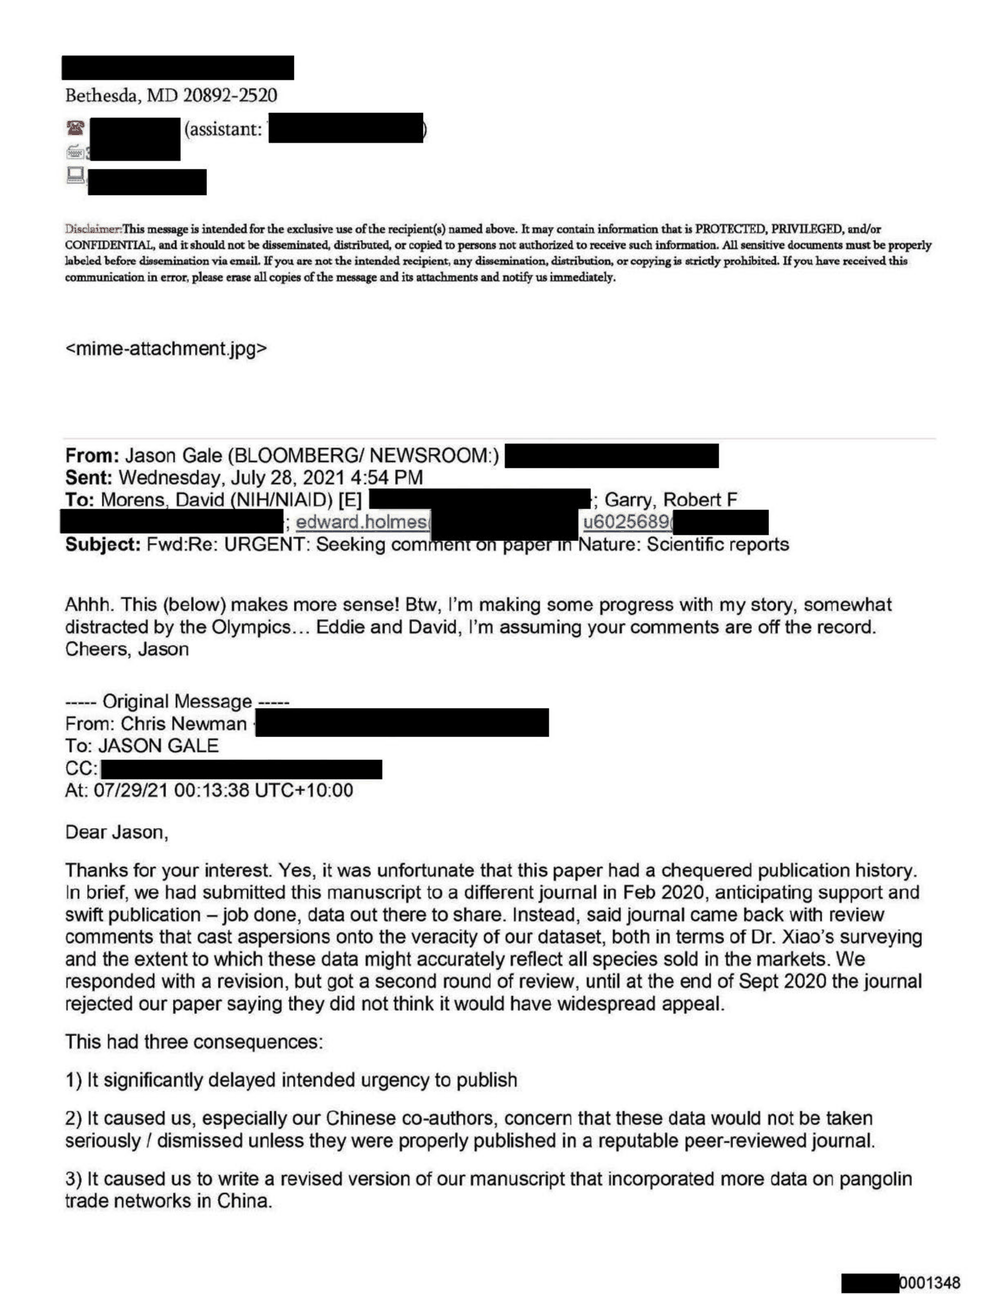 Page 43 from David Morens NIH Emails Redacted